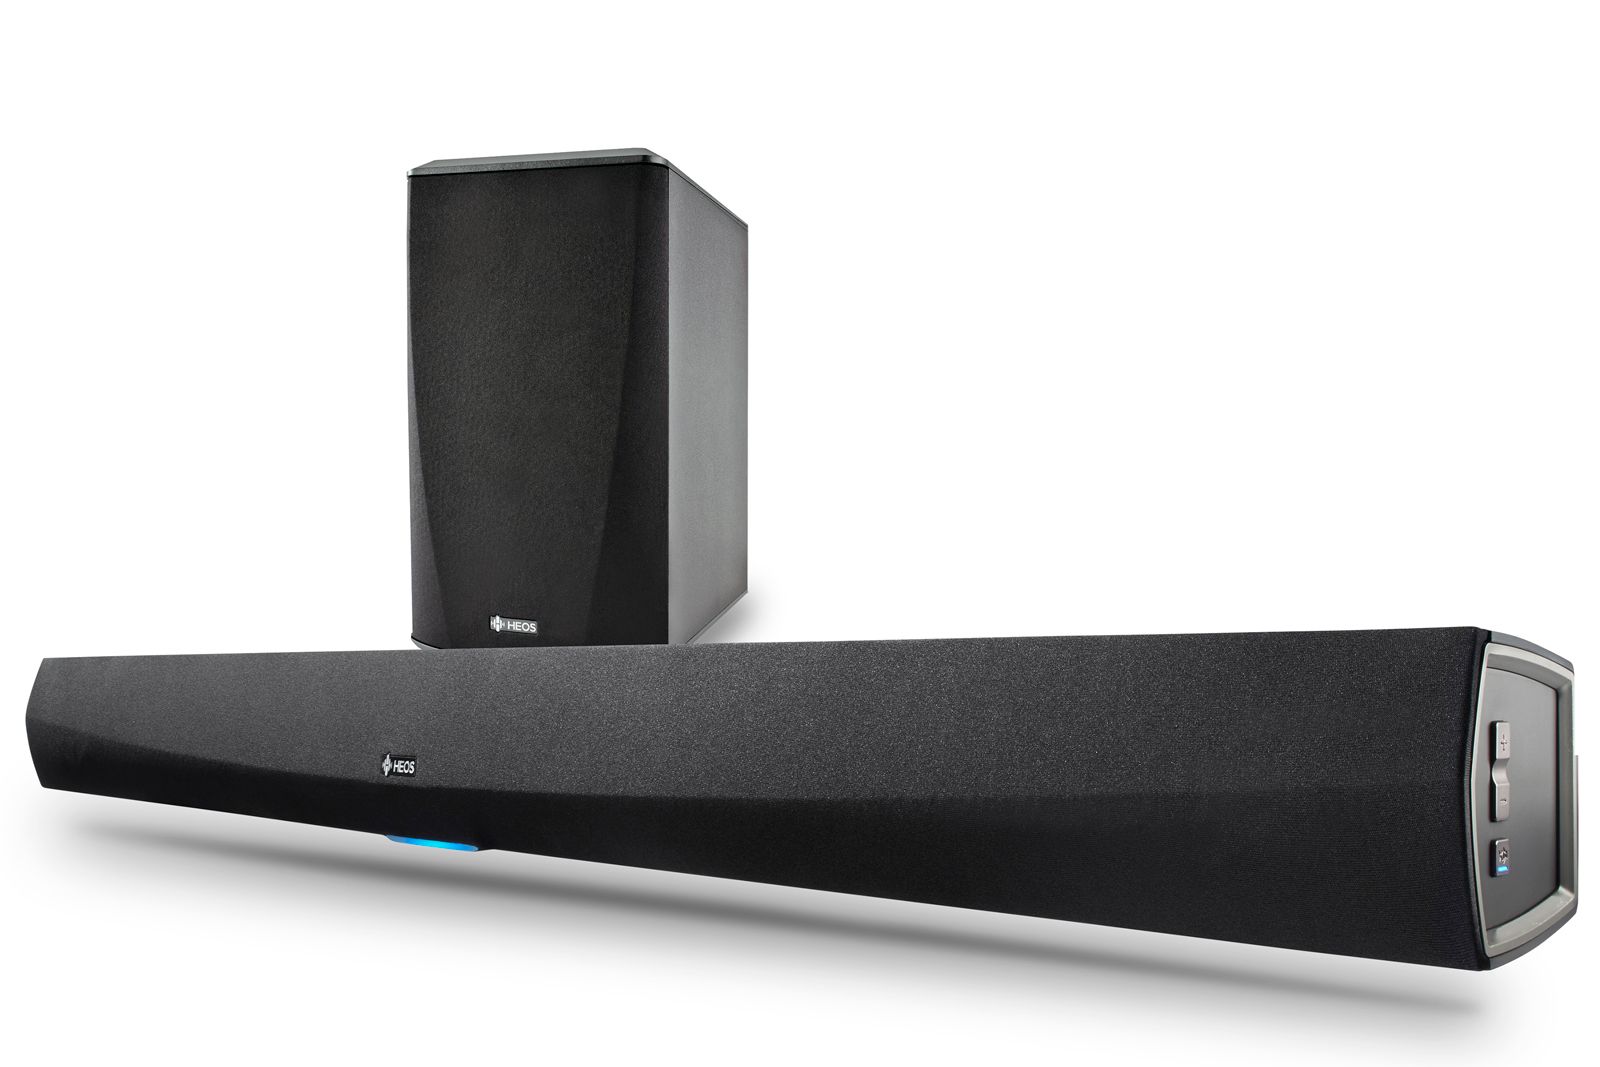 denon adds homecinema soundbar and subwoofer to heos wireless multi room system image 1